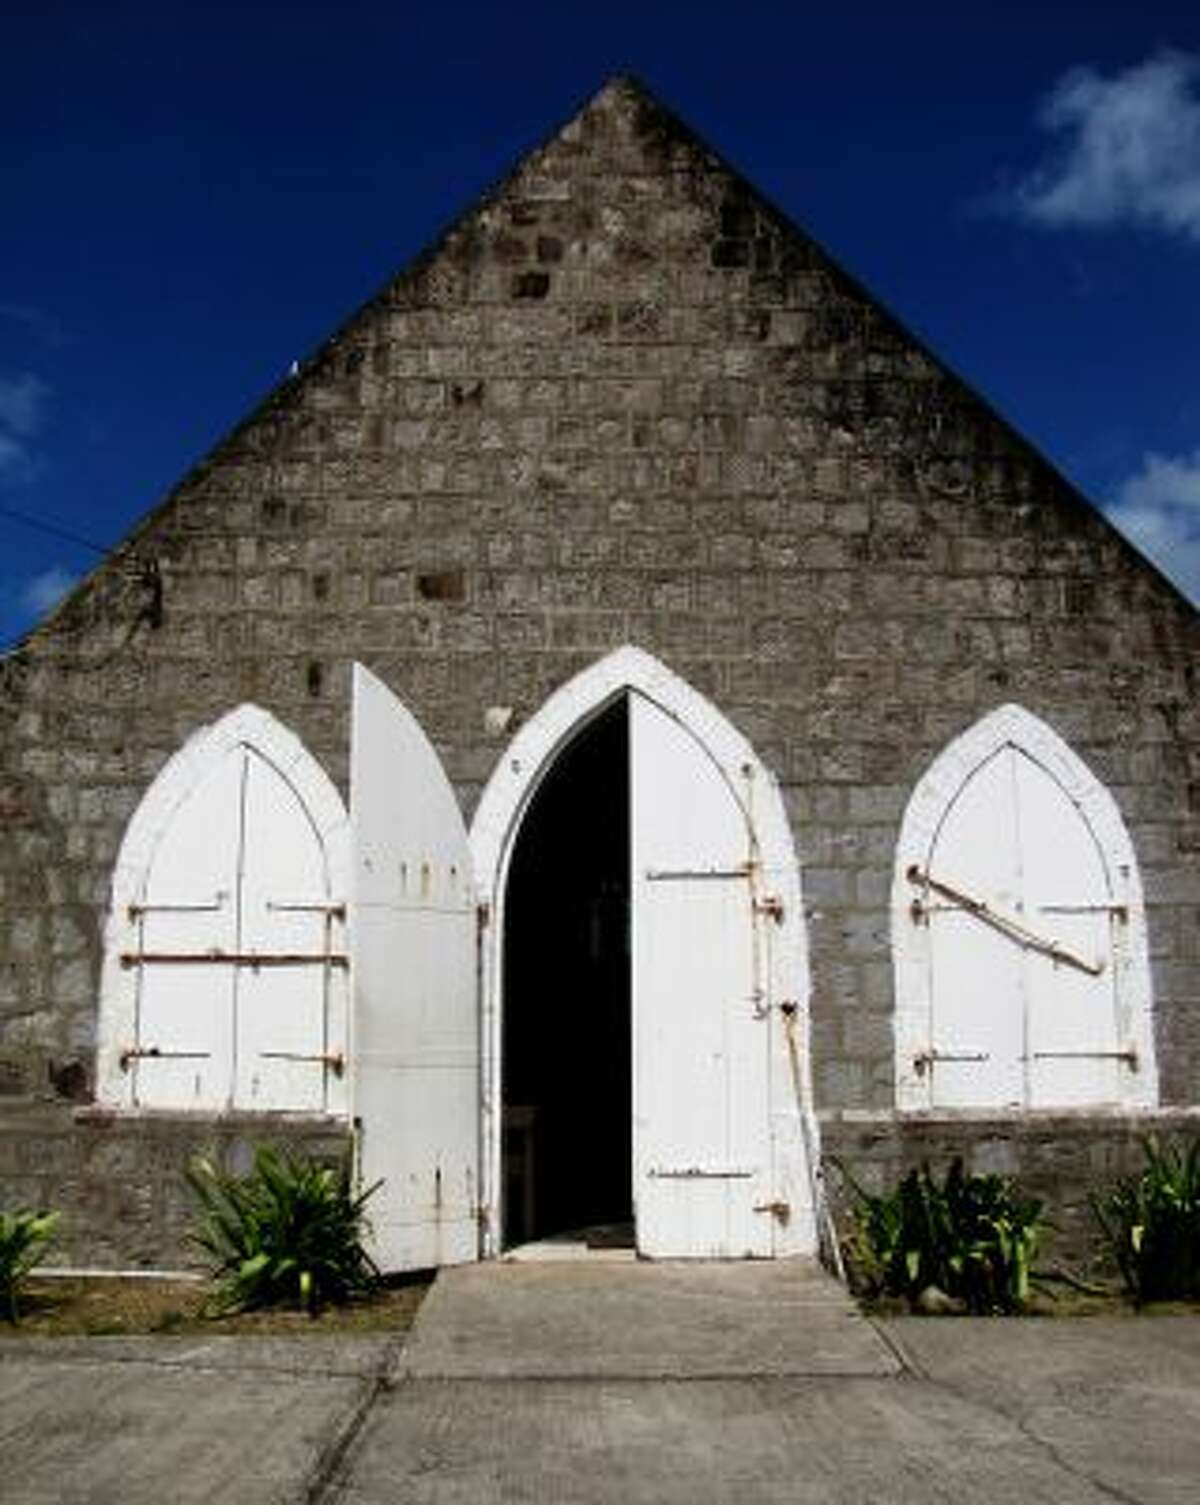 St. Thomas' Lowland Church, built around 1643, is the oldest on the island and said to be the oldest Anglican church in the Caribbean.